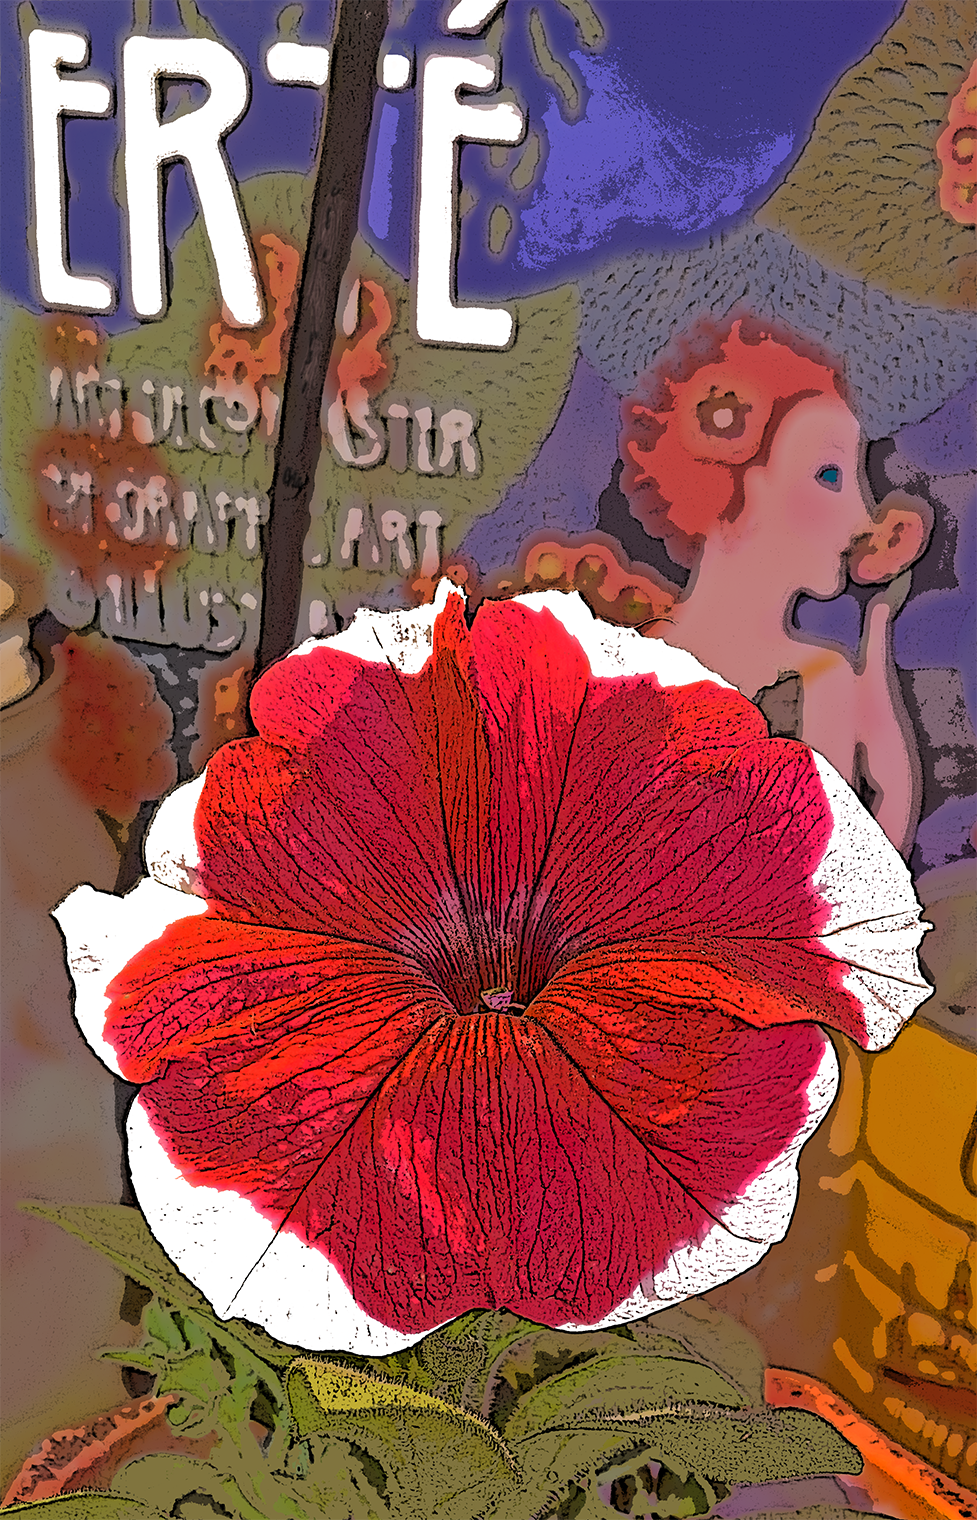 A red 'n white petunia given the cultivar name Dreams Red Picotee painted in front of a book about the Art Nouveau master Erte as captured by pixels at the Planting Station in Corvus Studio at 3 Dog Acres in the Ozark Highlands of Arkansas